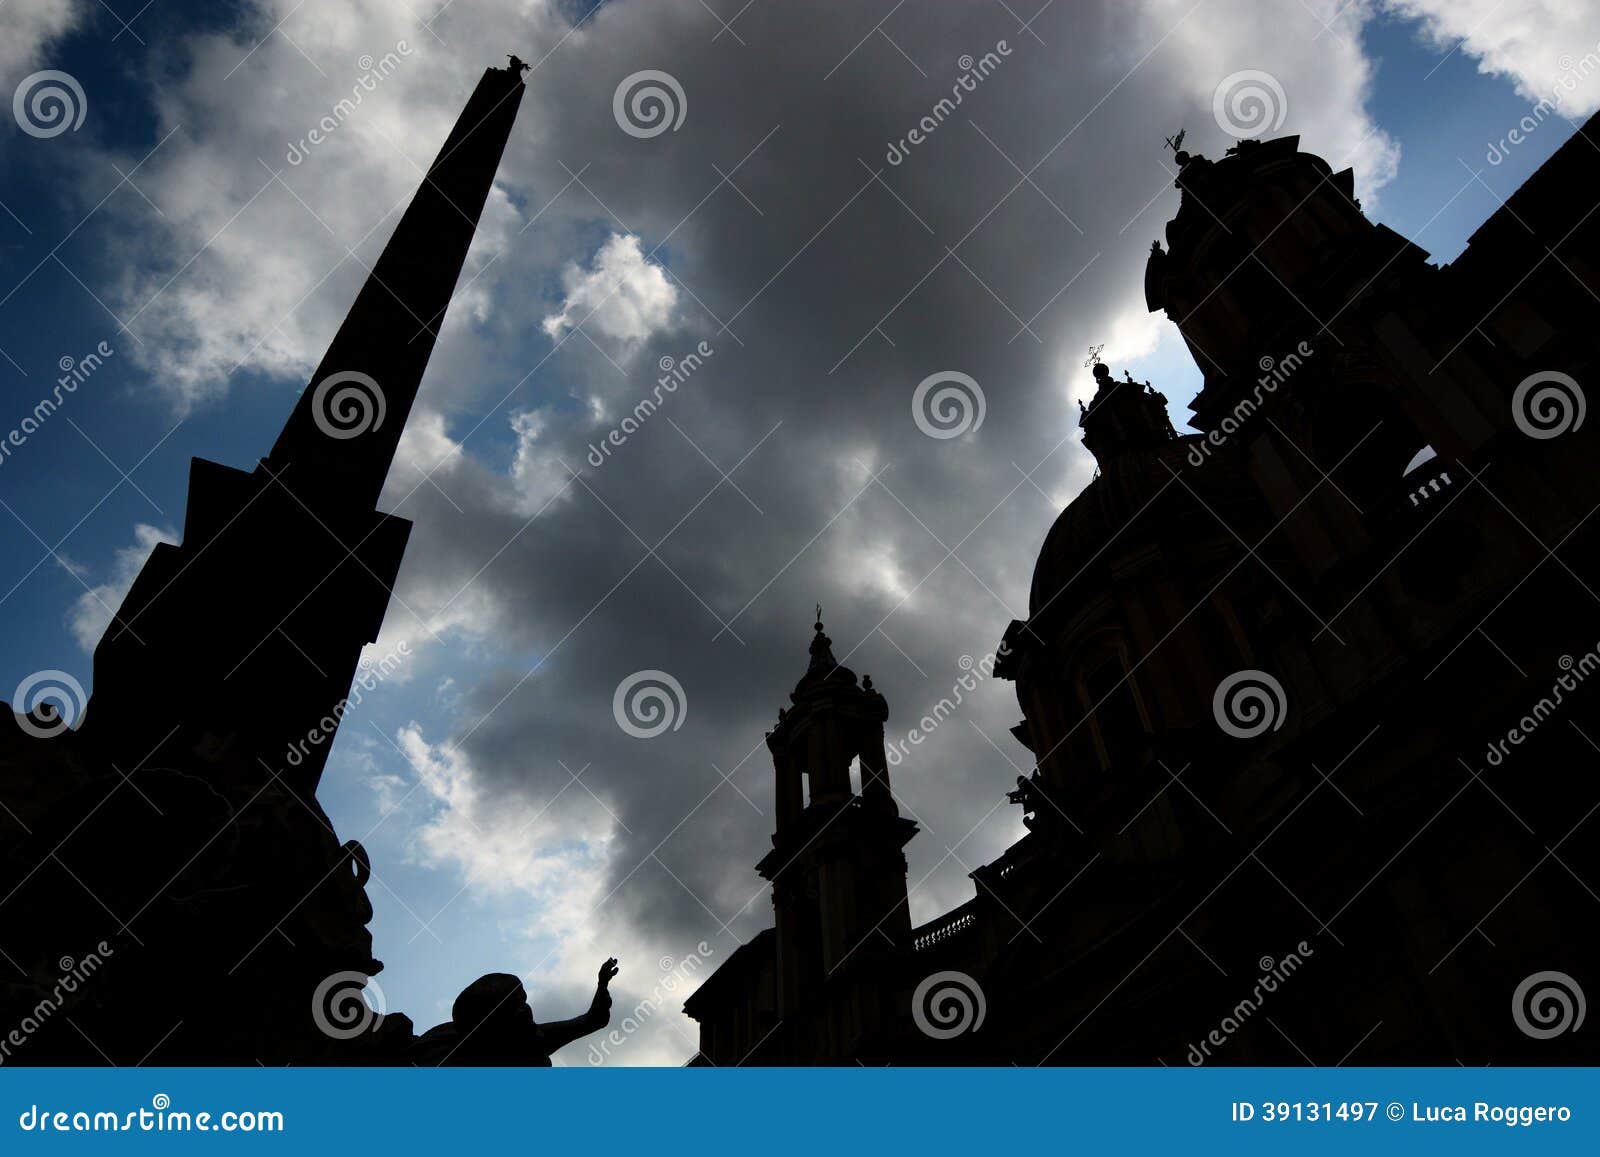 silhouettes of obelisk, fountain and church. piazz